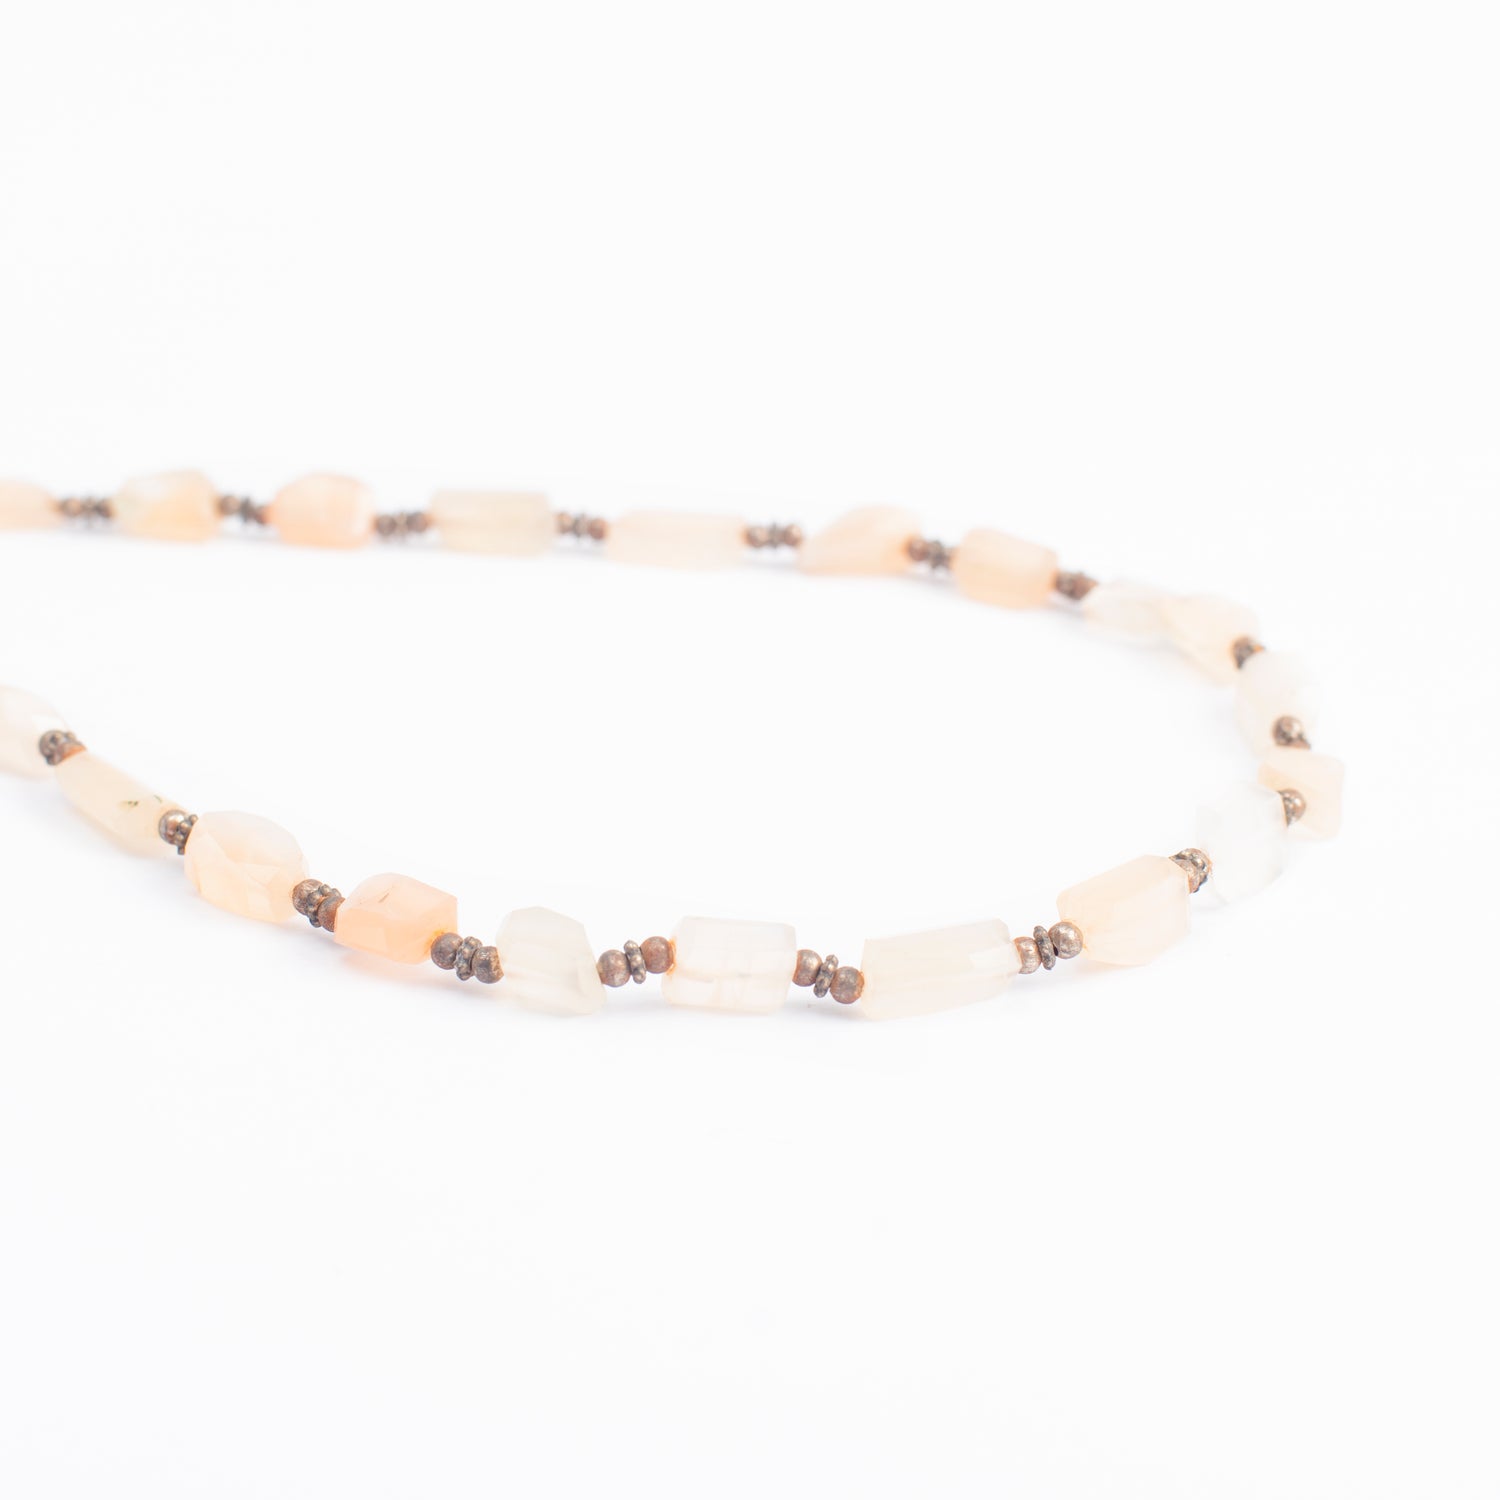 Moonstone with Metal Beads Necklace